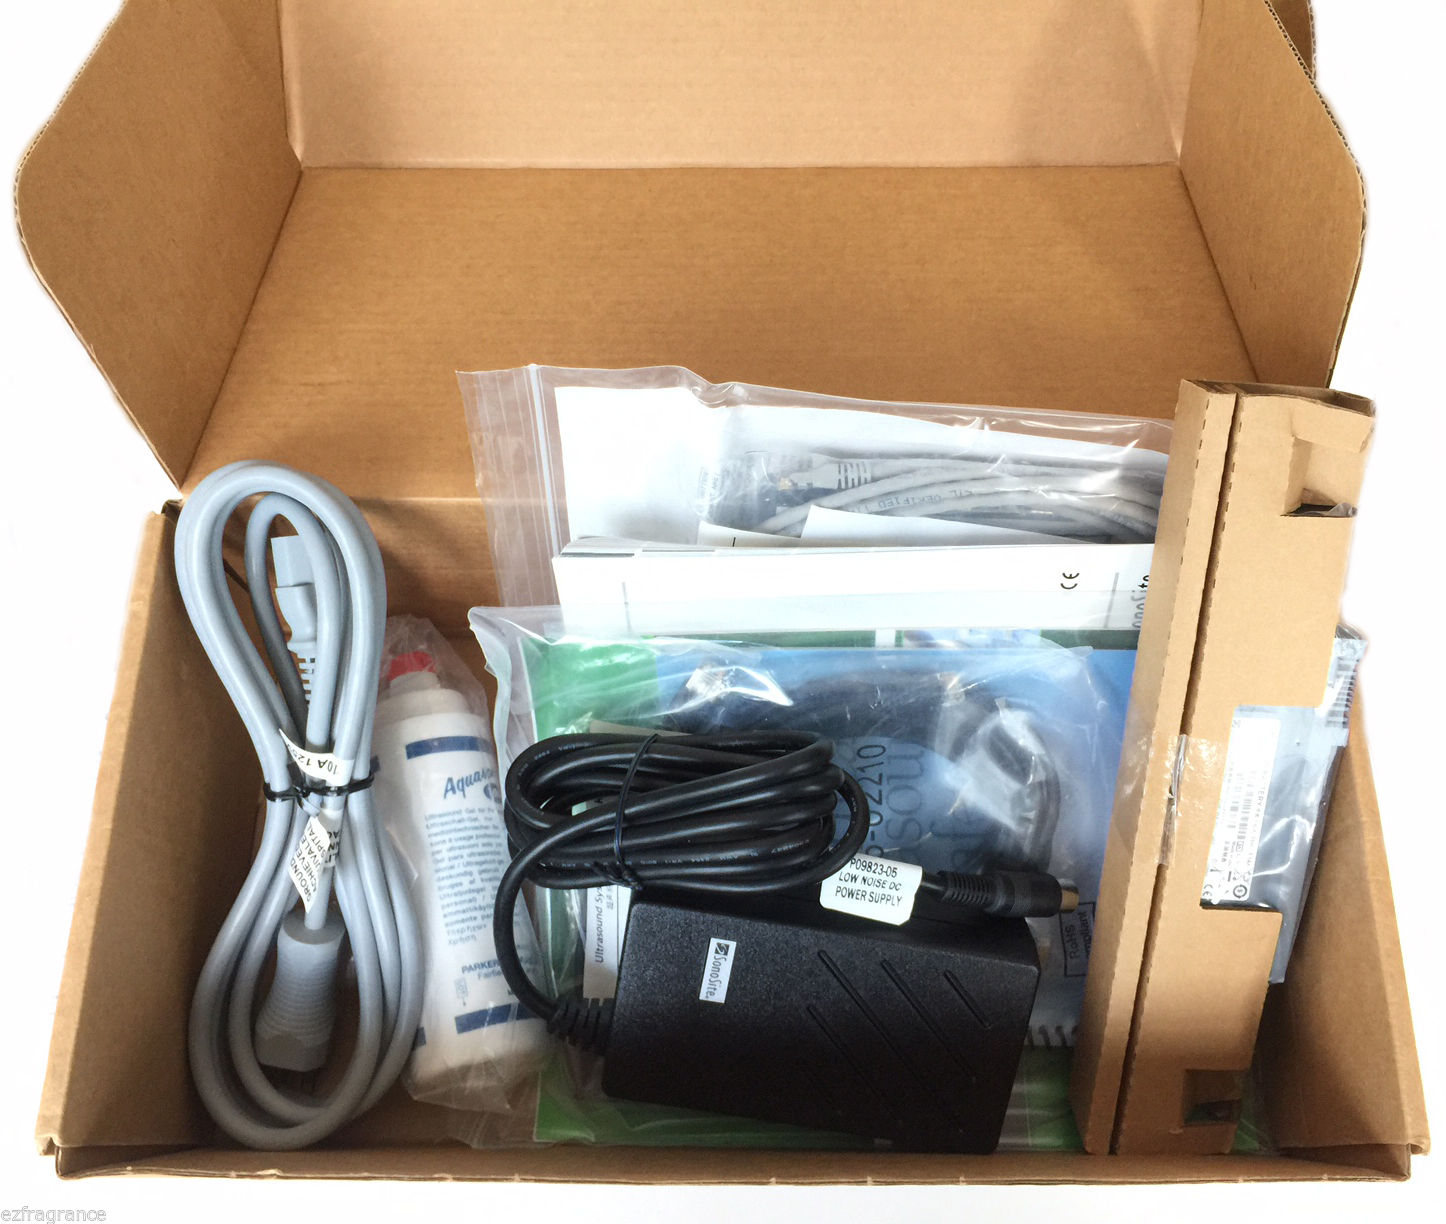 SonoSite EDGE ULTRASOUND SYSTEM.SPANISH LANGUAGE New in box Fully loaded DIAGNOSTIC ULTRASOUND MACHINES FOR SALE